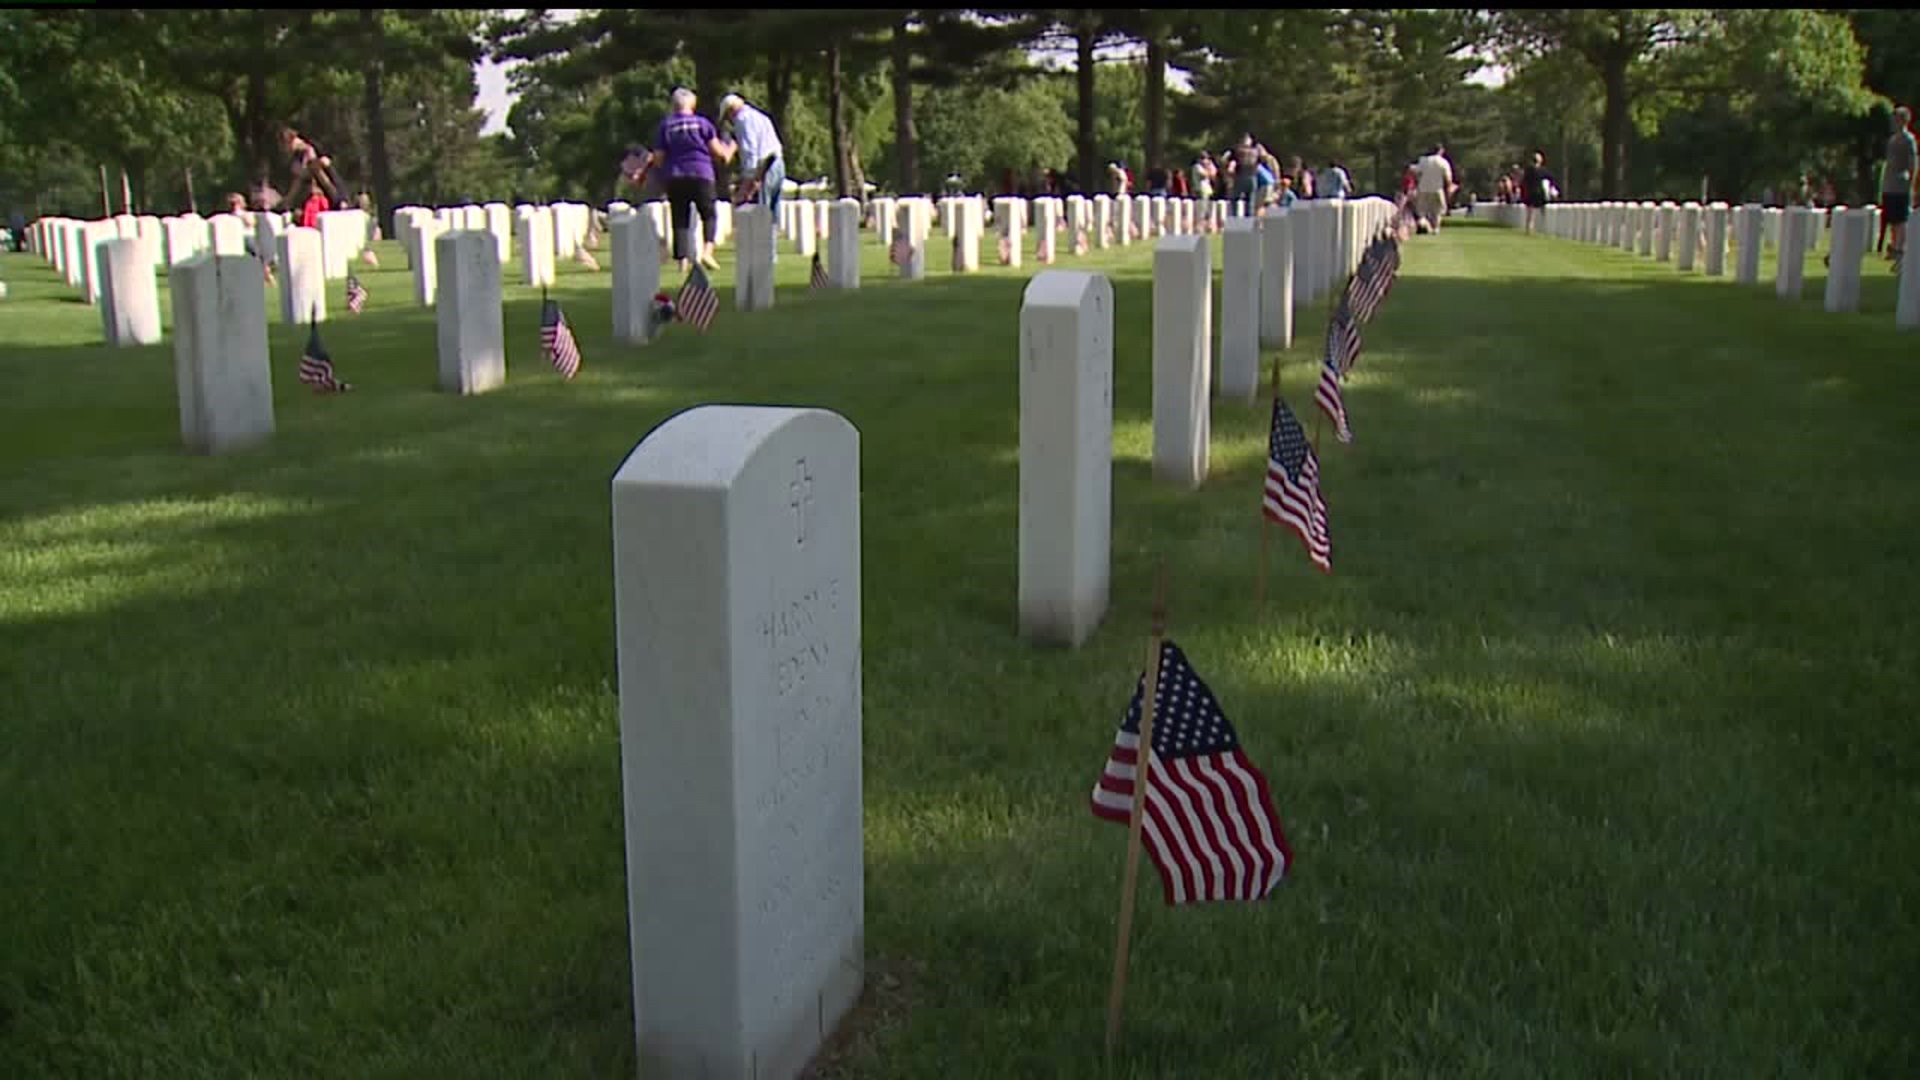 volunteers needed to place flags on tombstones for Memorial Day